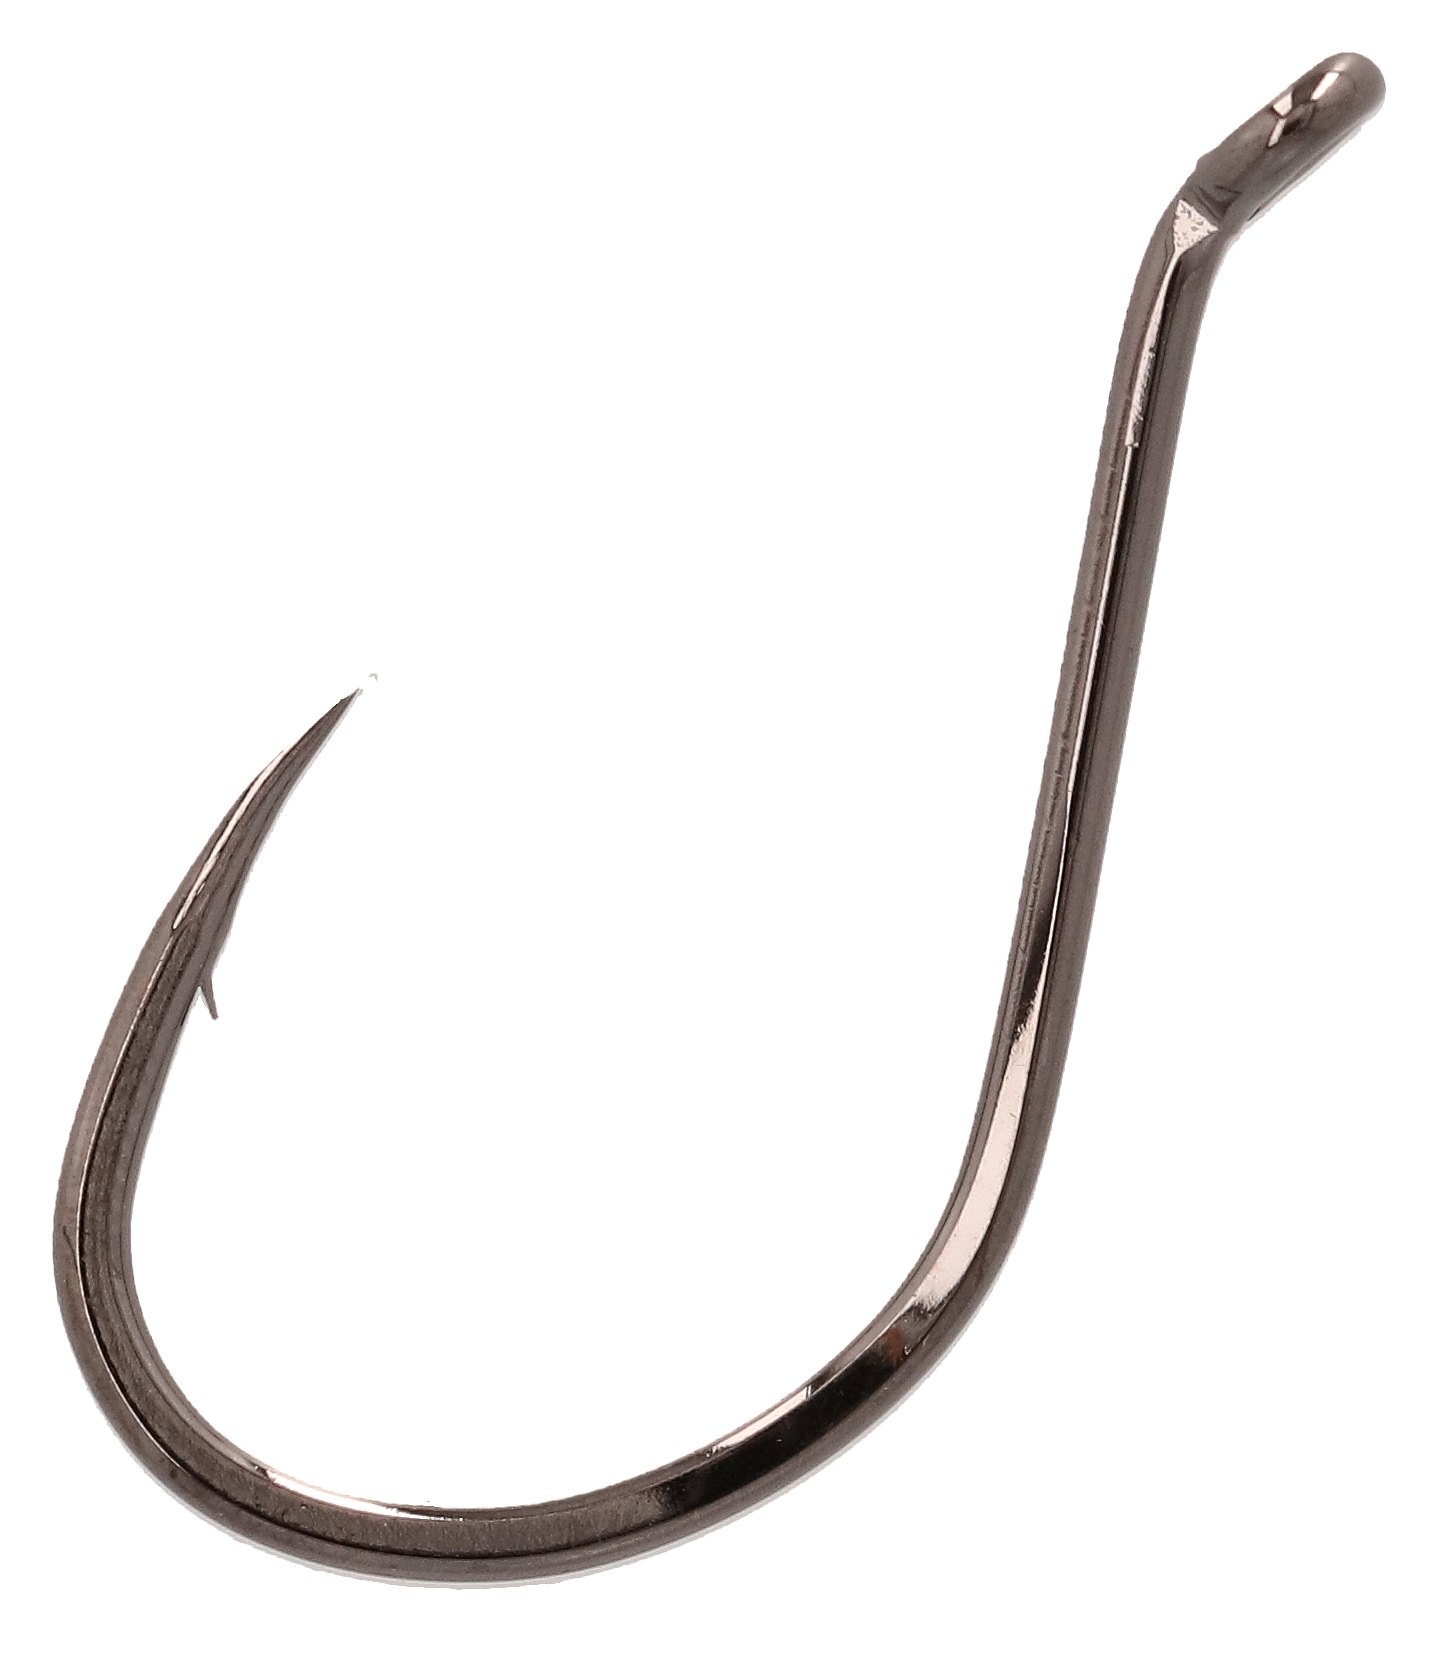 Offshore Angler Terminal Tackle - Hooks, Jigheads, Rigs